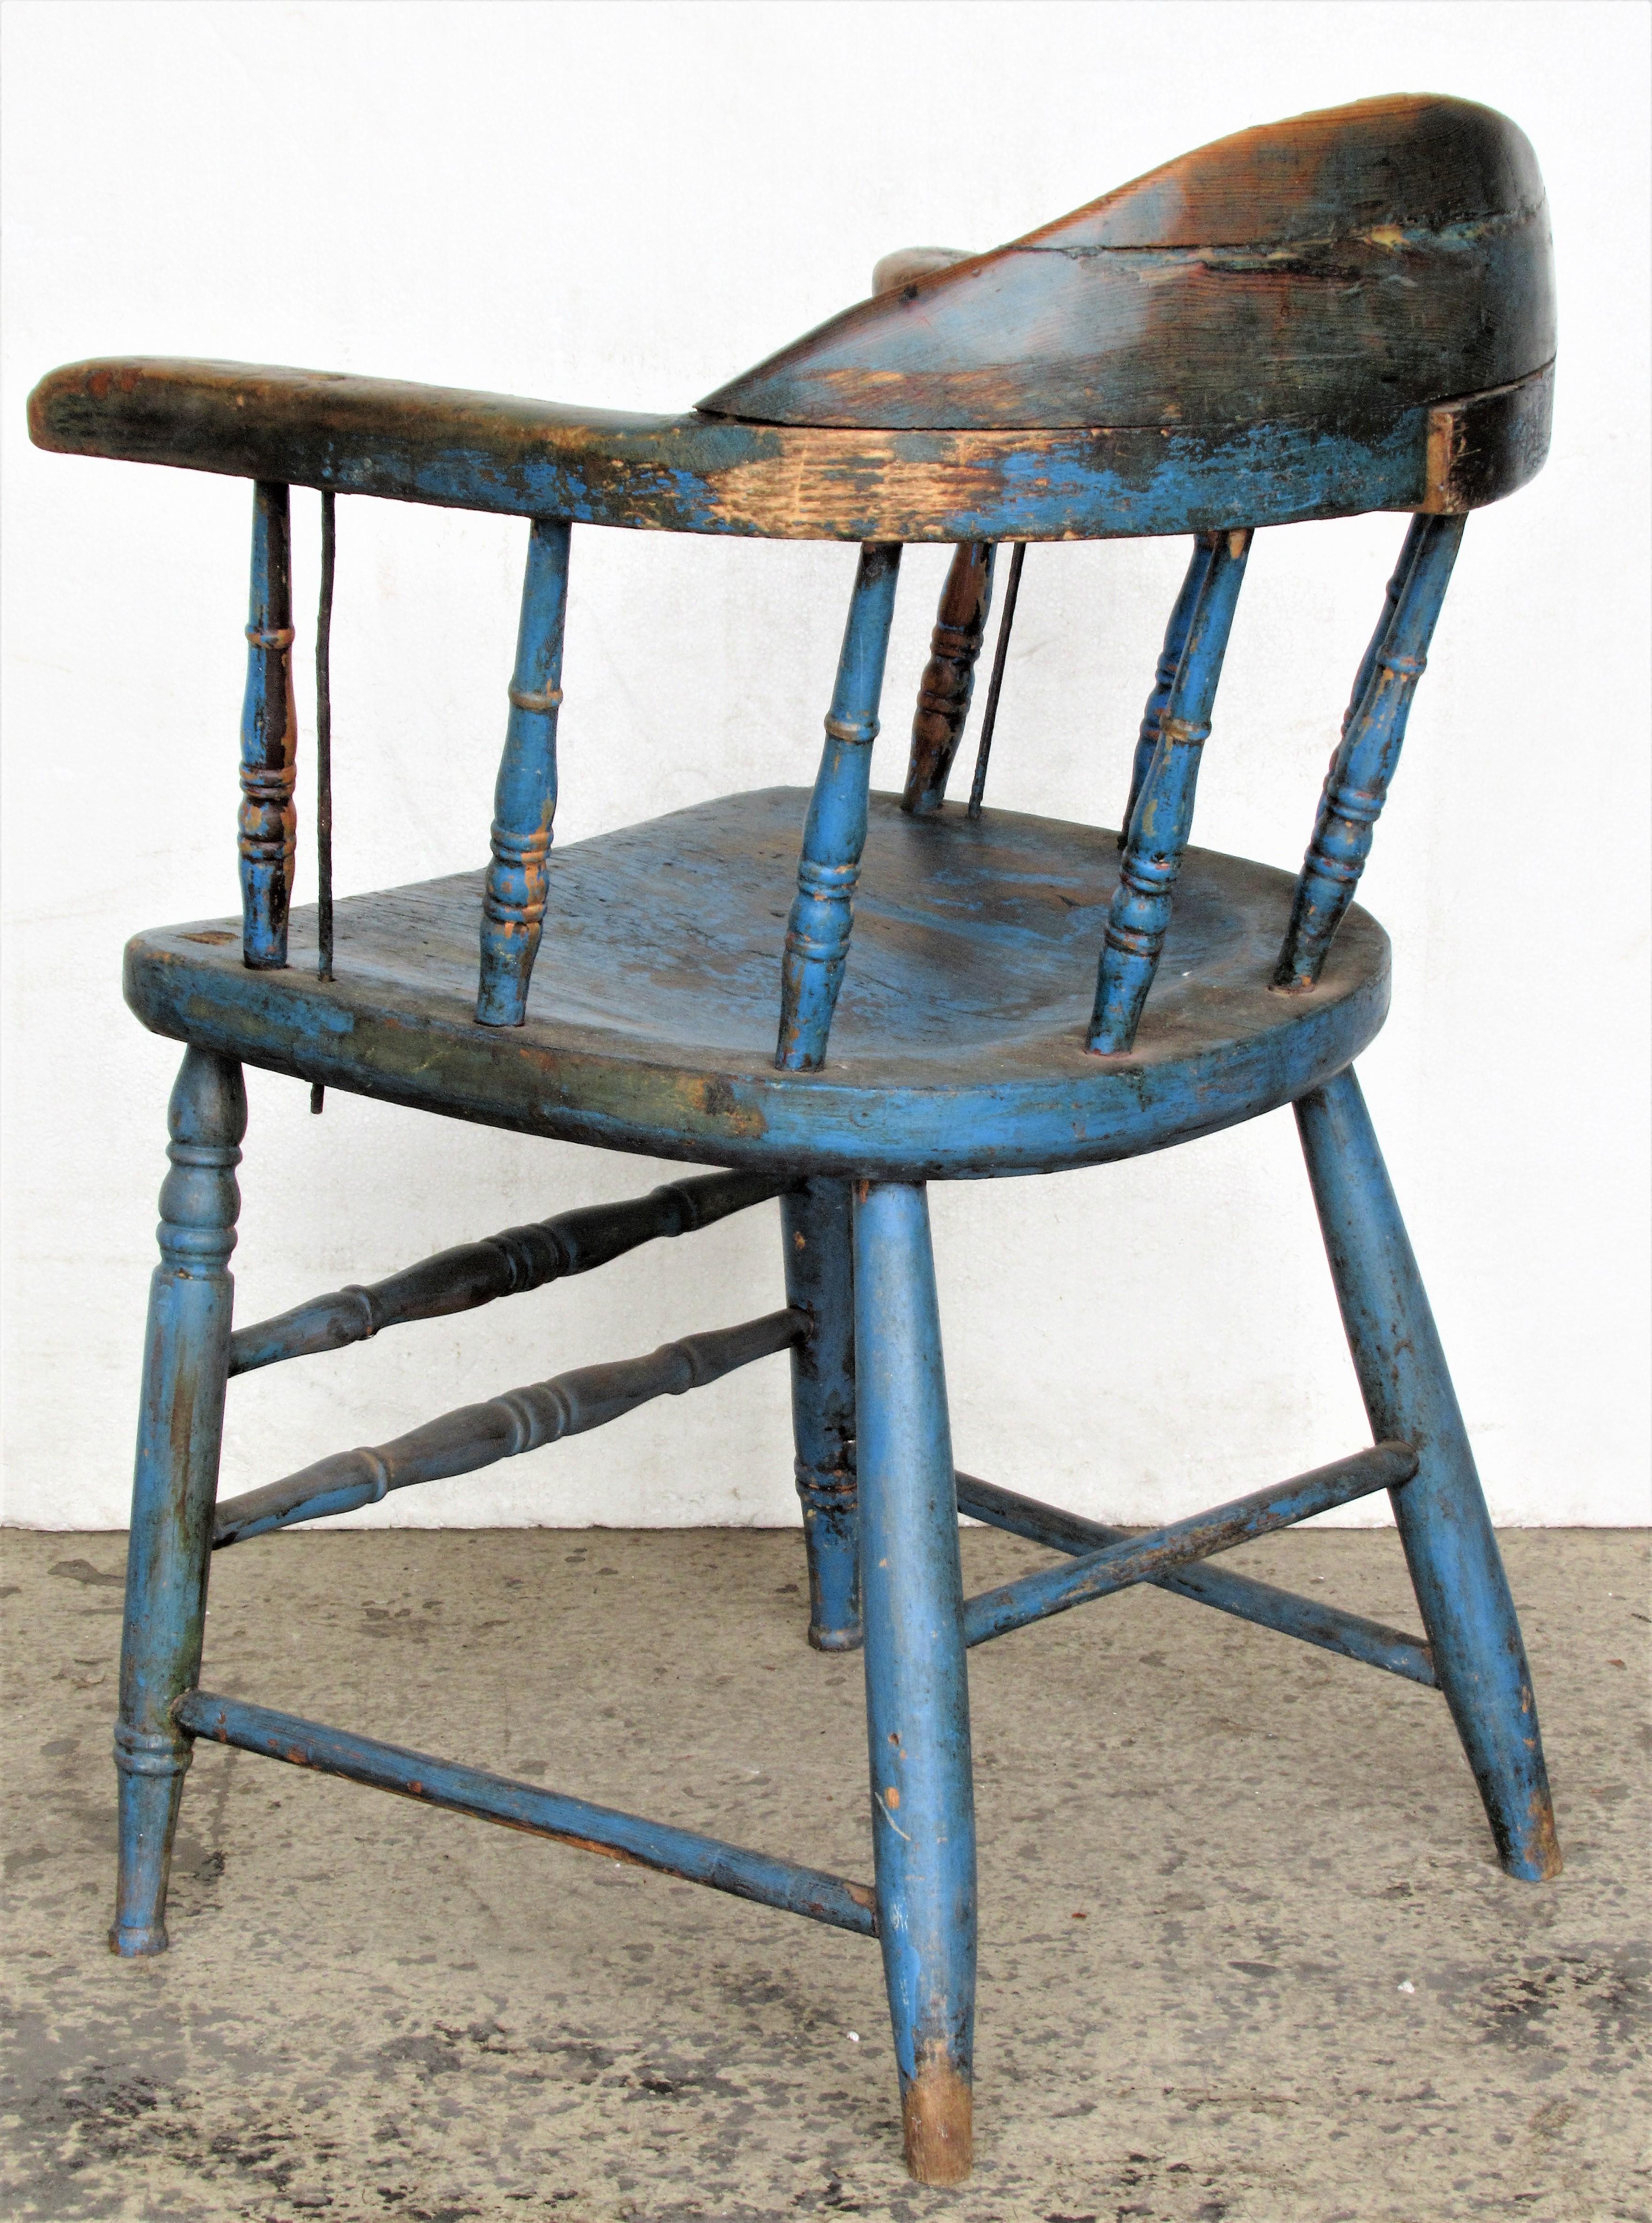 Antique American Firehouse Windsor Chair in Old Blue Paint 8